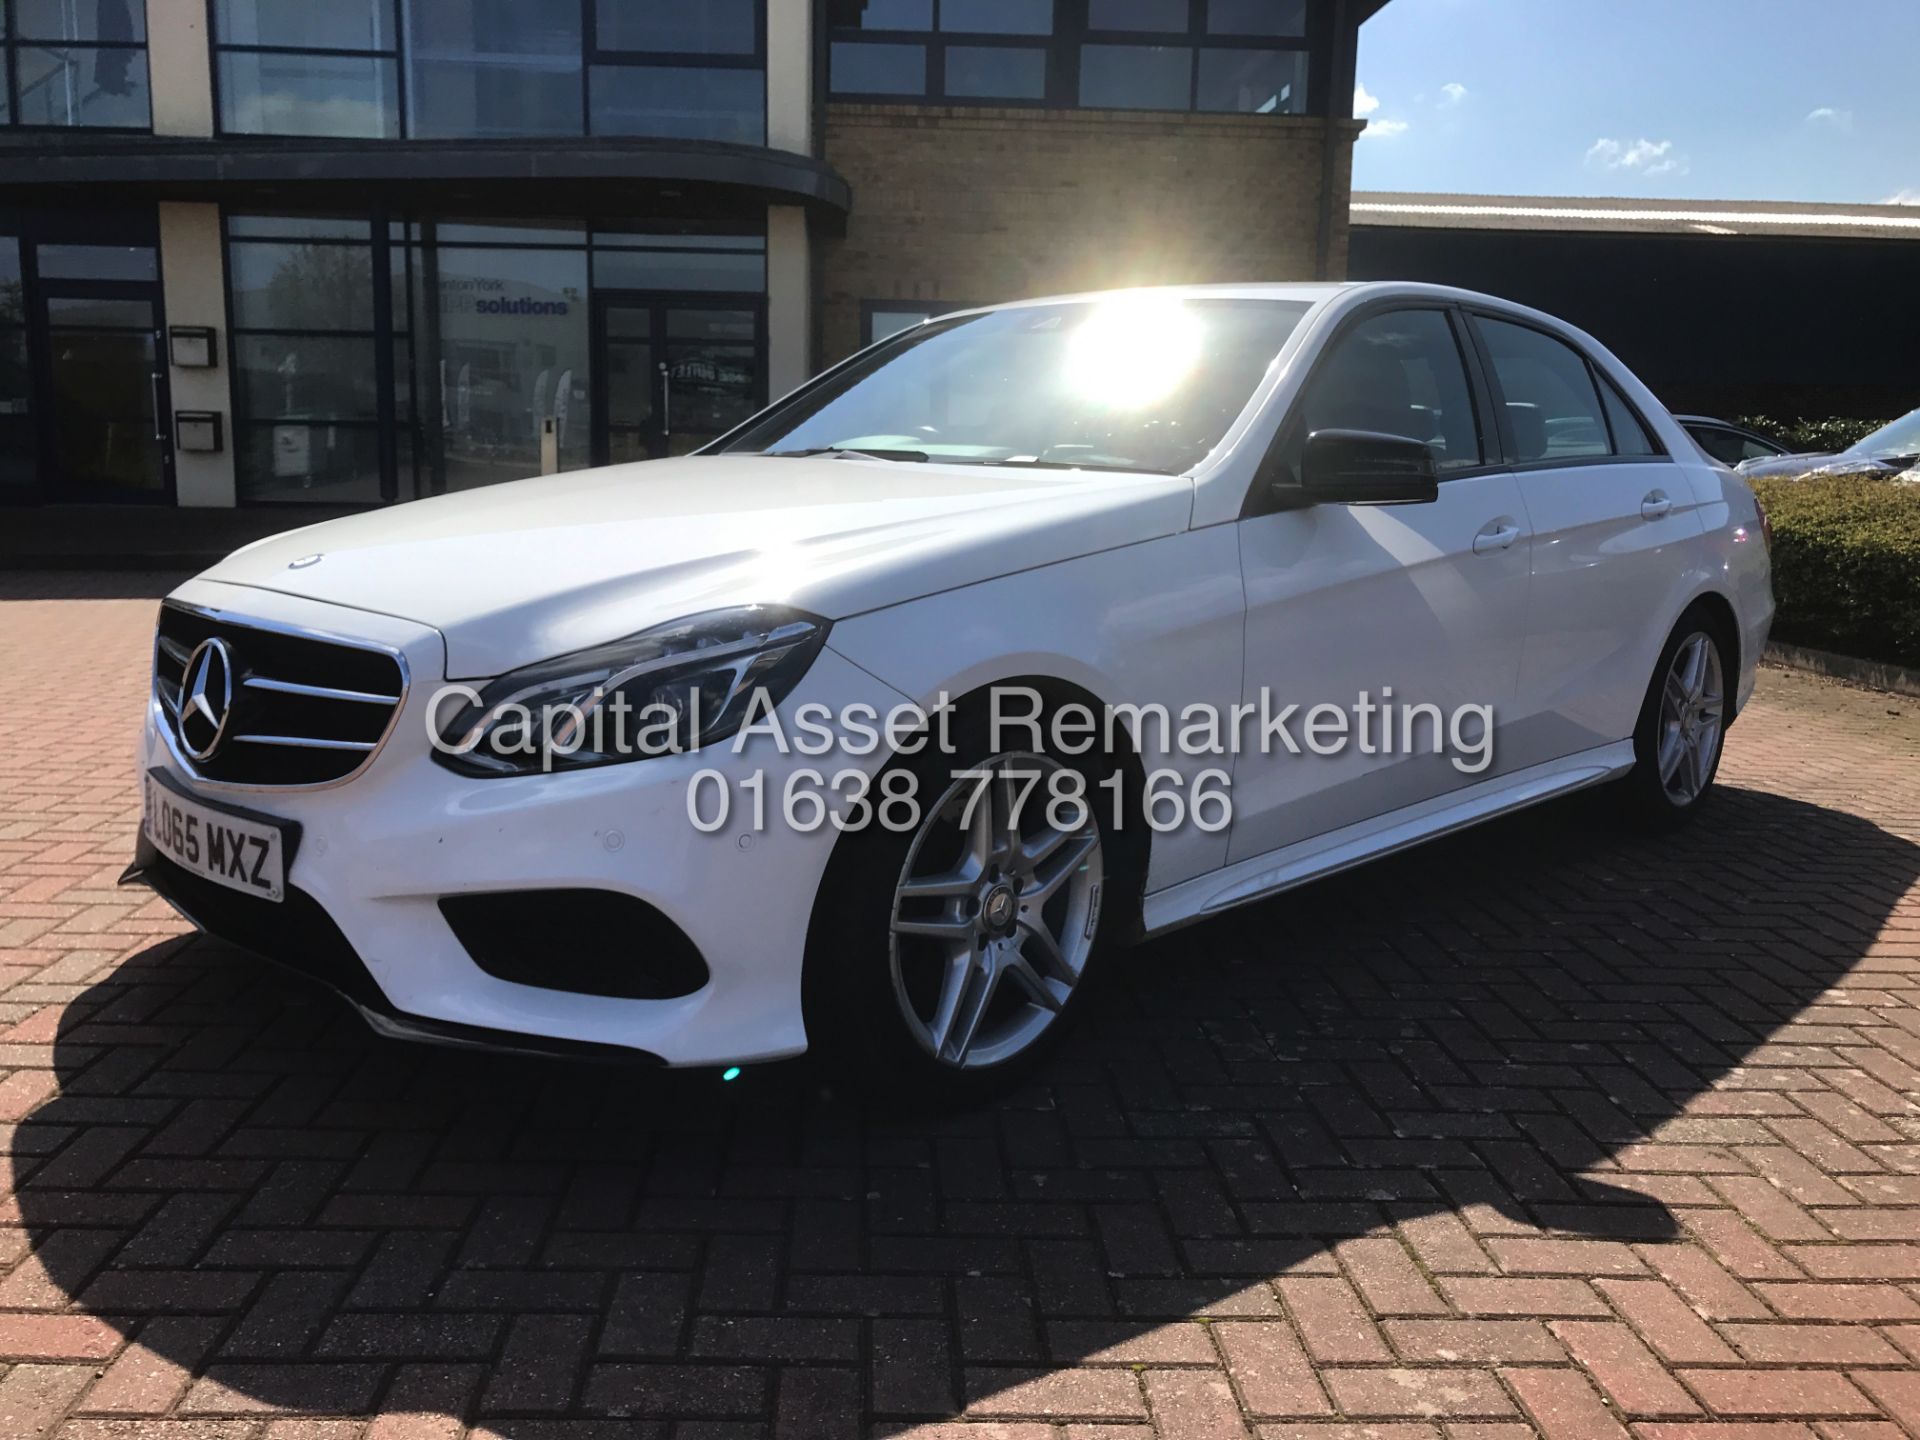 On Sale MERCEDES E220CDI "AMG NIGHT EDITION" 7G TRONIC (2016 MODEL) 1 OWNER - SAT NAV - LEATHER - Image 4 of 23